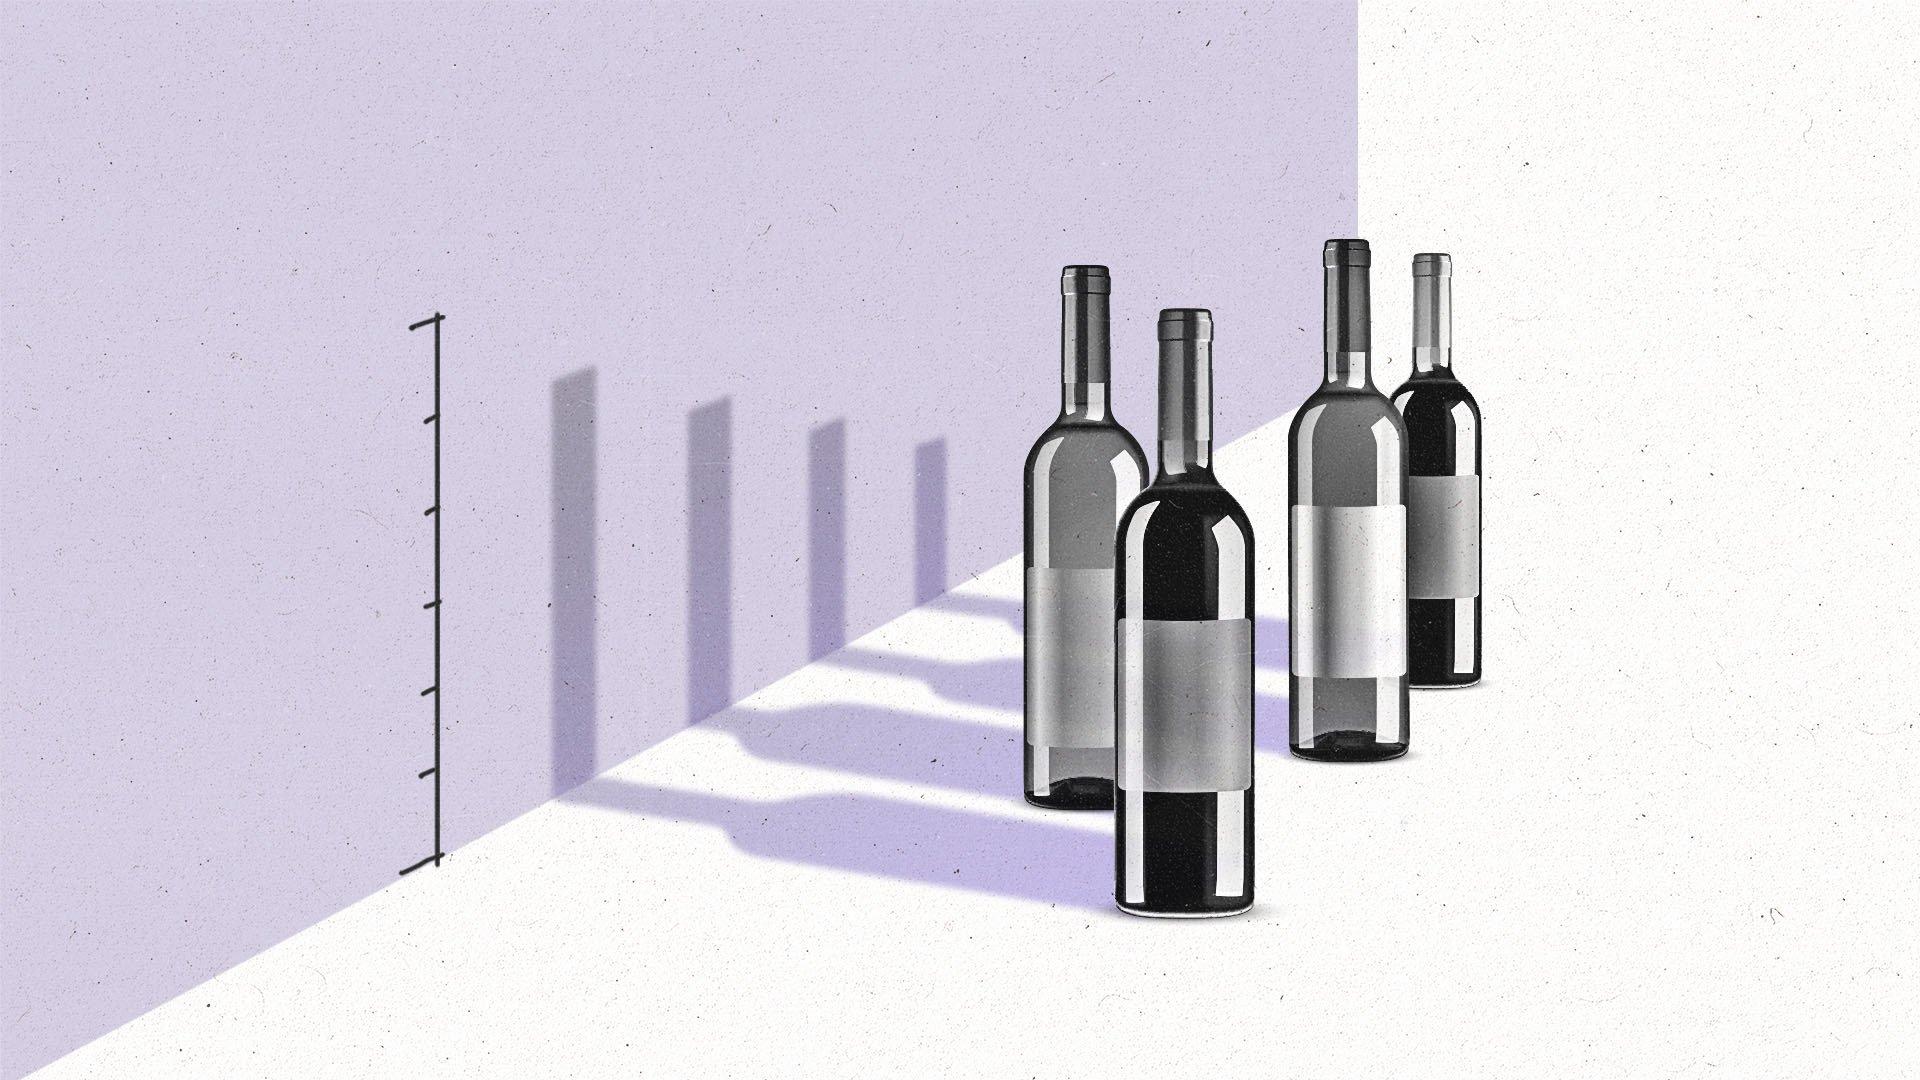 Wine bottles cast shadows on a wall to create a bar graph.